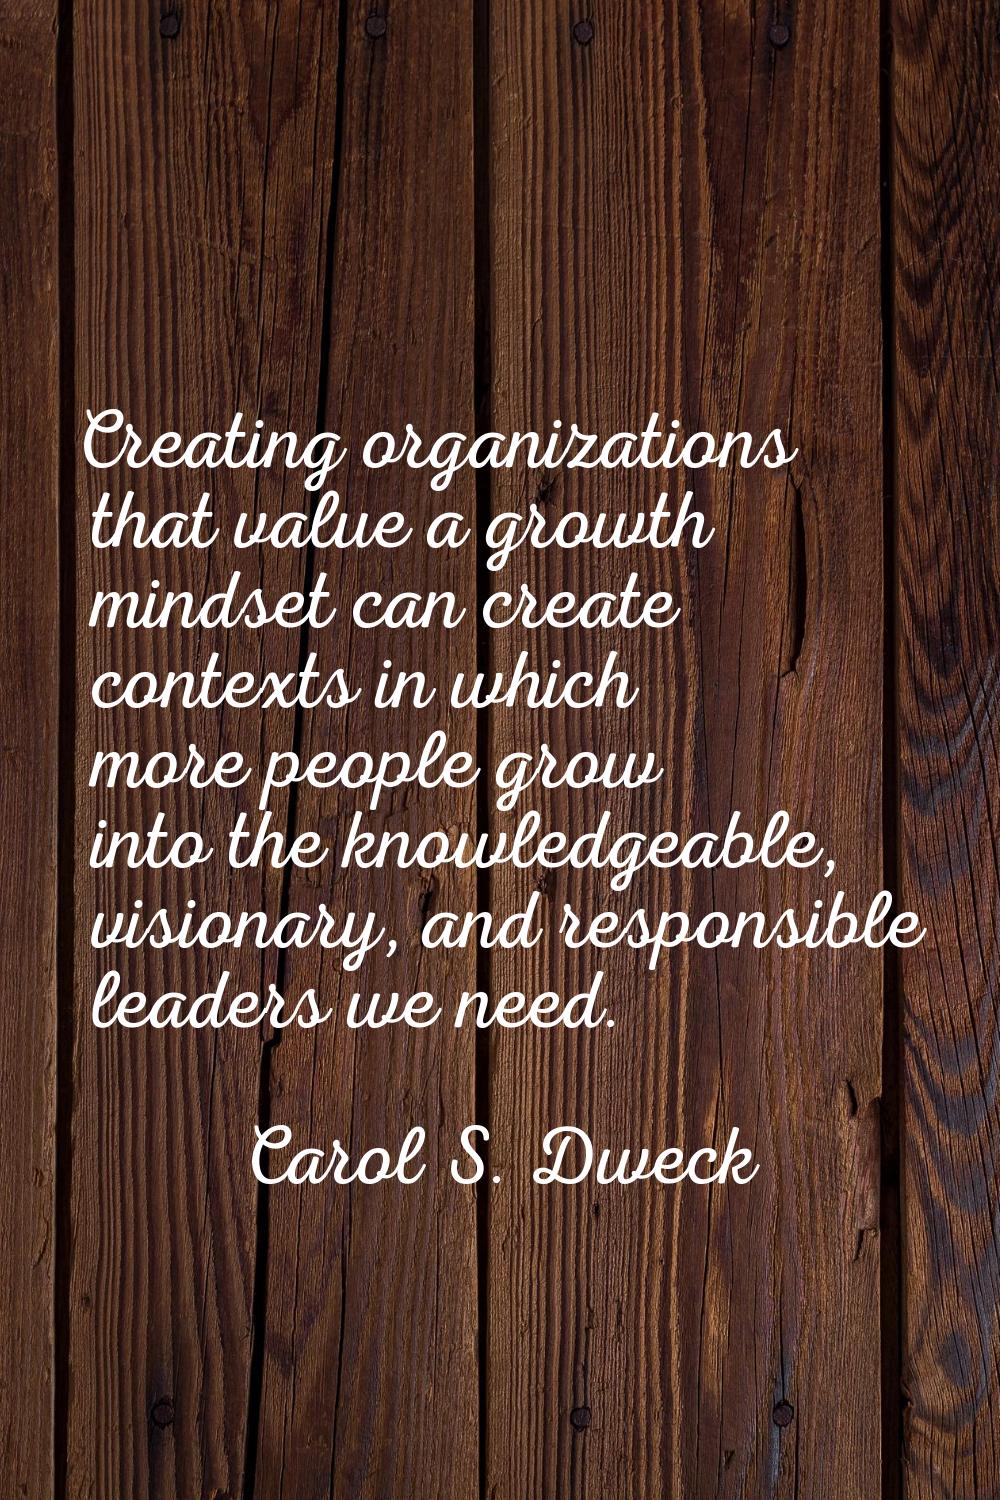 Creating organizations that value a growth mindset can create contexts in which more people grow in